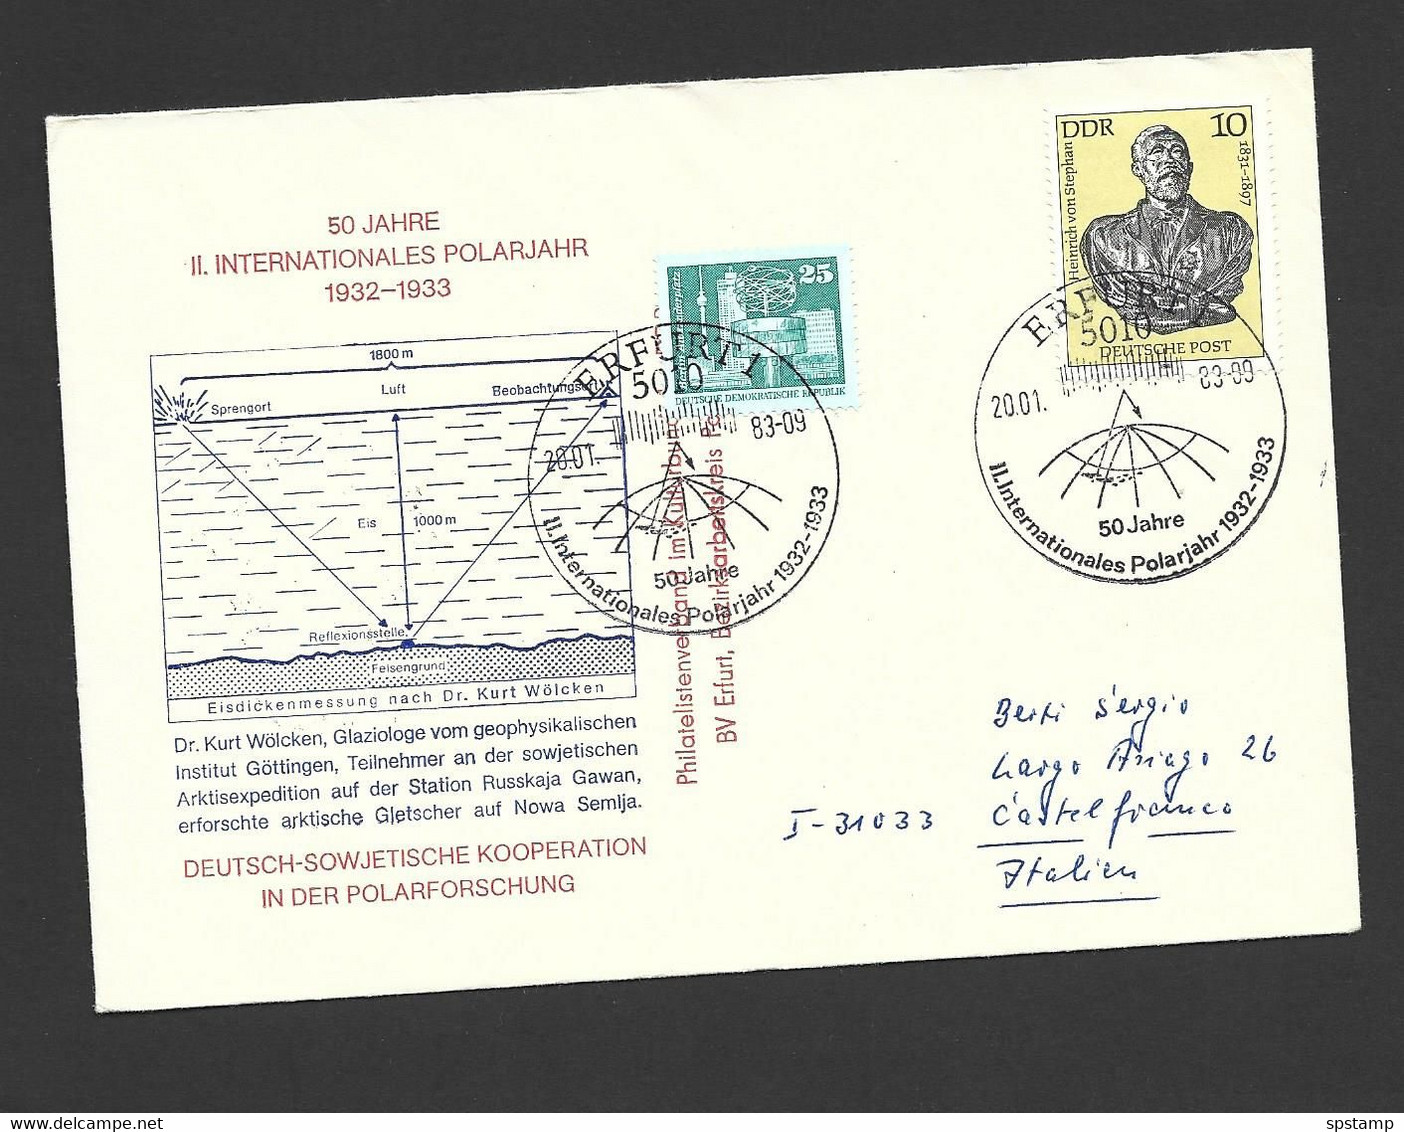 Germany DDR 1983 Polar Year Anniversary Illustrated Cover To Italy, Special Cds - Internationales Polarjahr